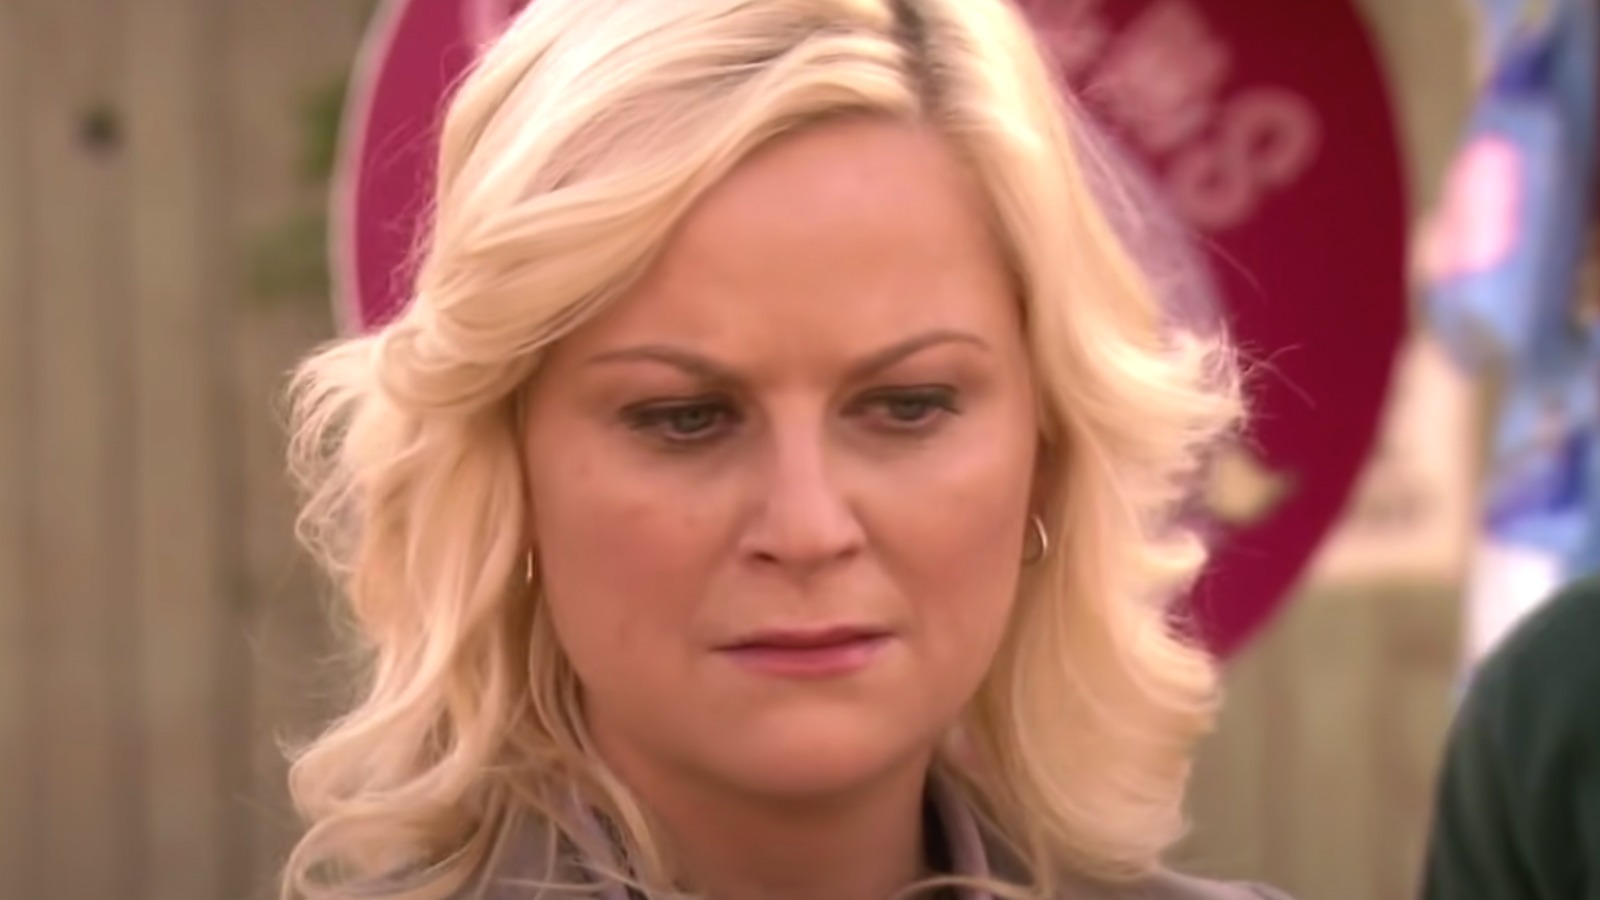 The Harvest Festival Detail In Parks & Recreation That Has Fans